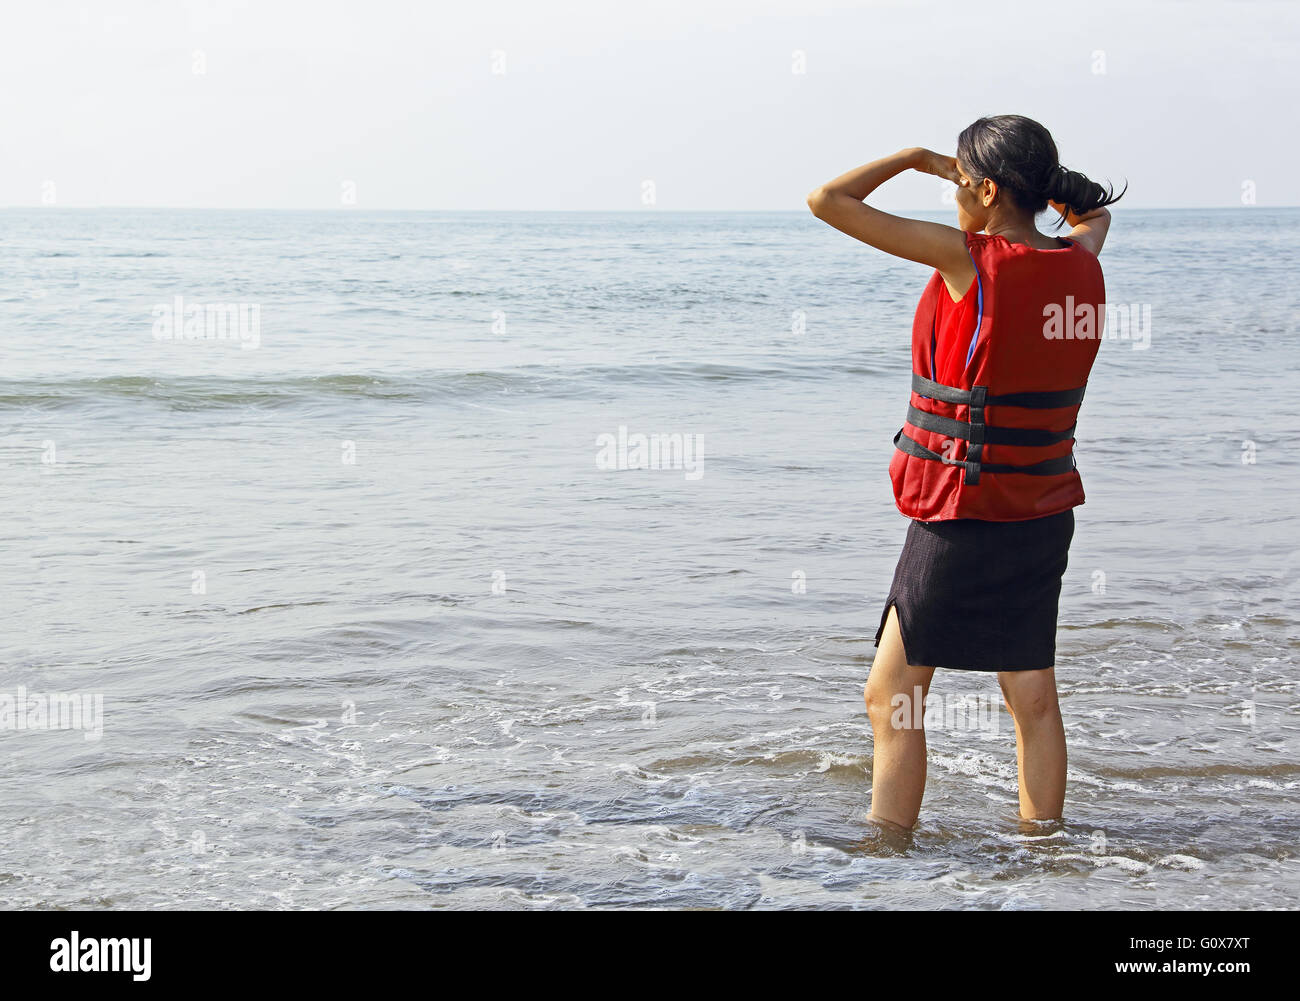 Teen girl in life jacket waiting at the beach in Goa, India, ready for water sport activities Stock Photo